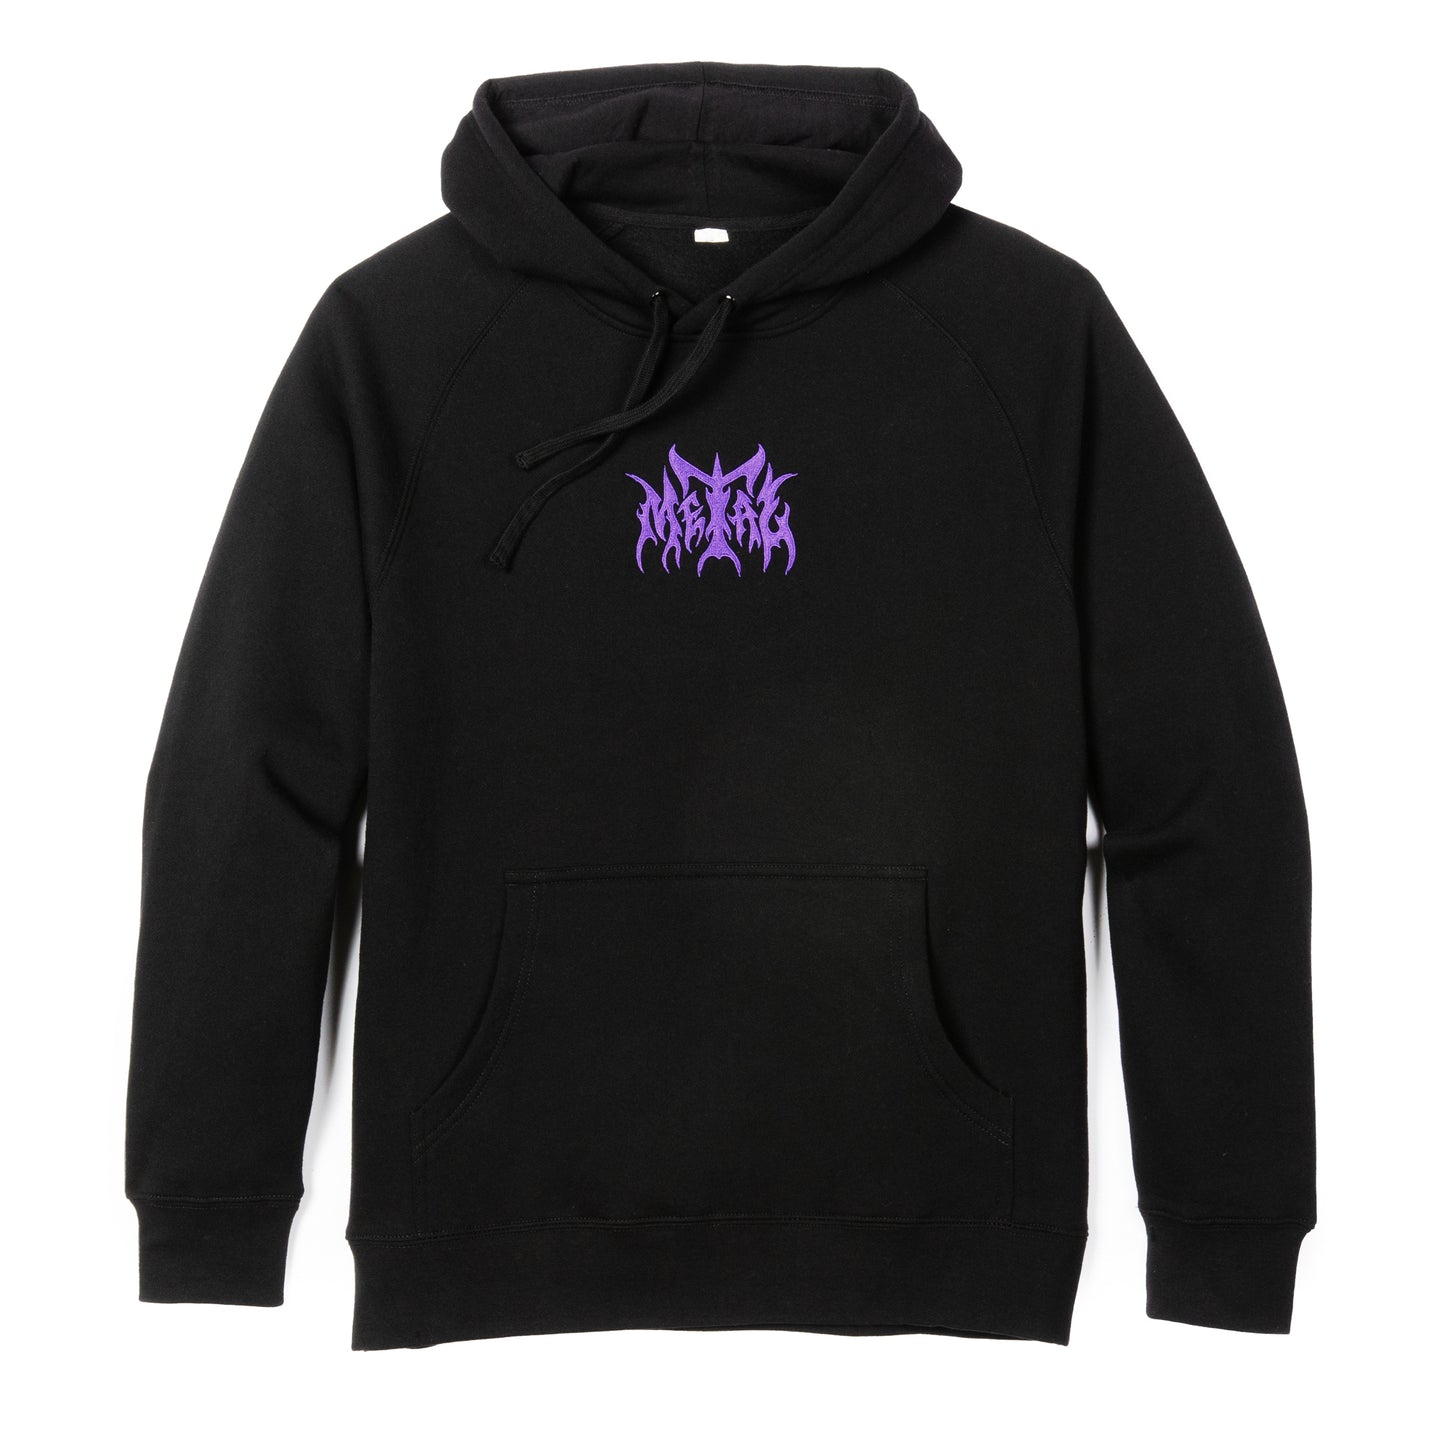 METAL EMBROIDERED HOODY